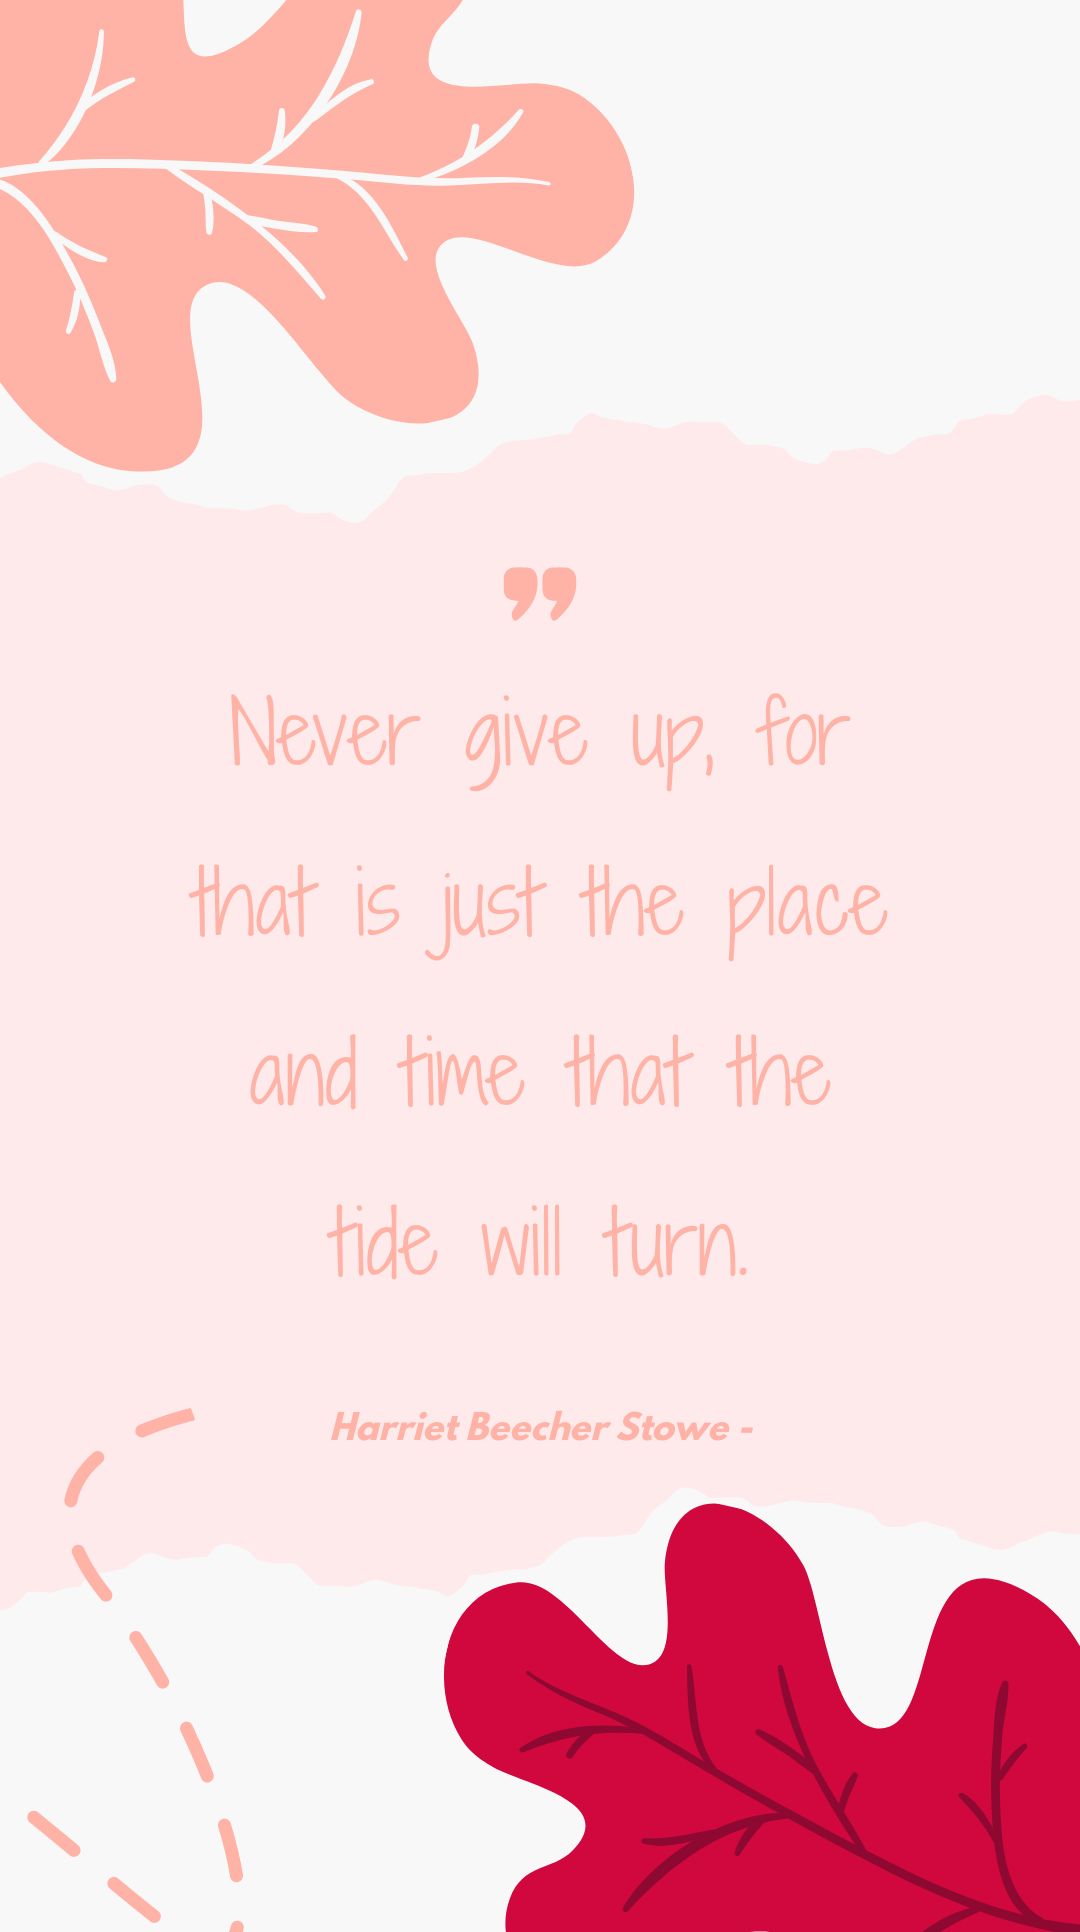 Harriet Beecher Stowe - Never give up, for that is just the place and time that the tide will turn.